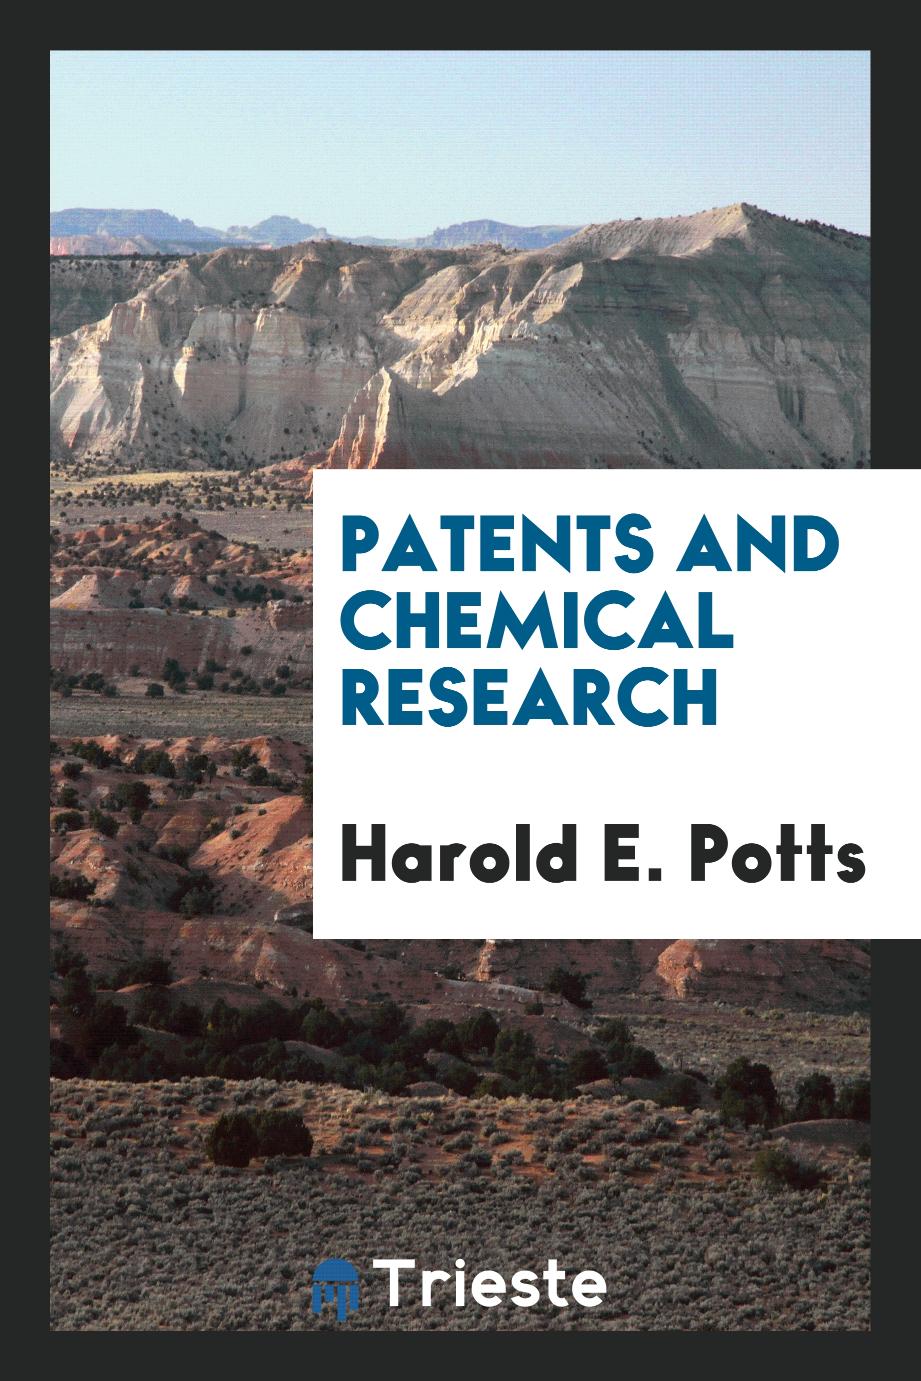 Harold E. Potts - Patents and chemical research